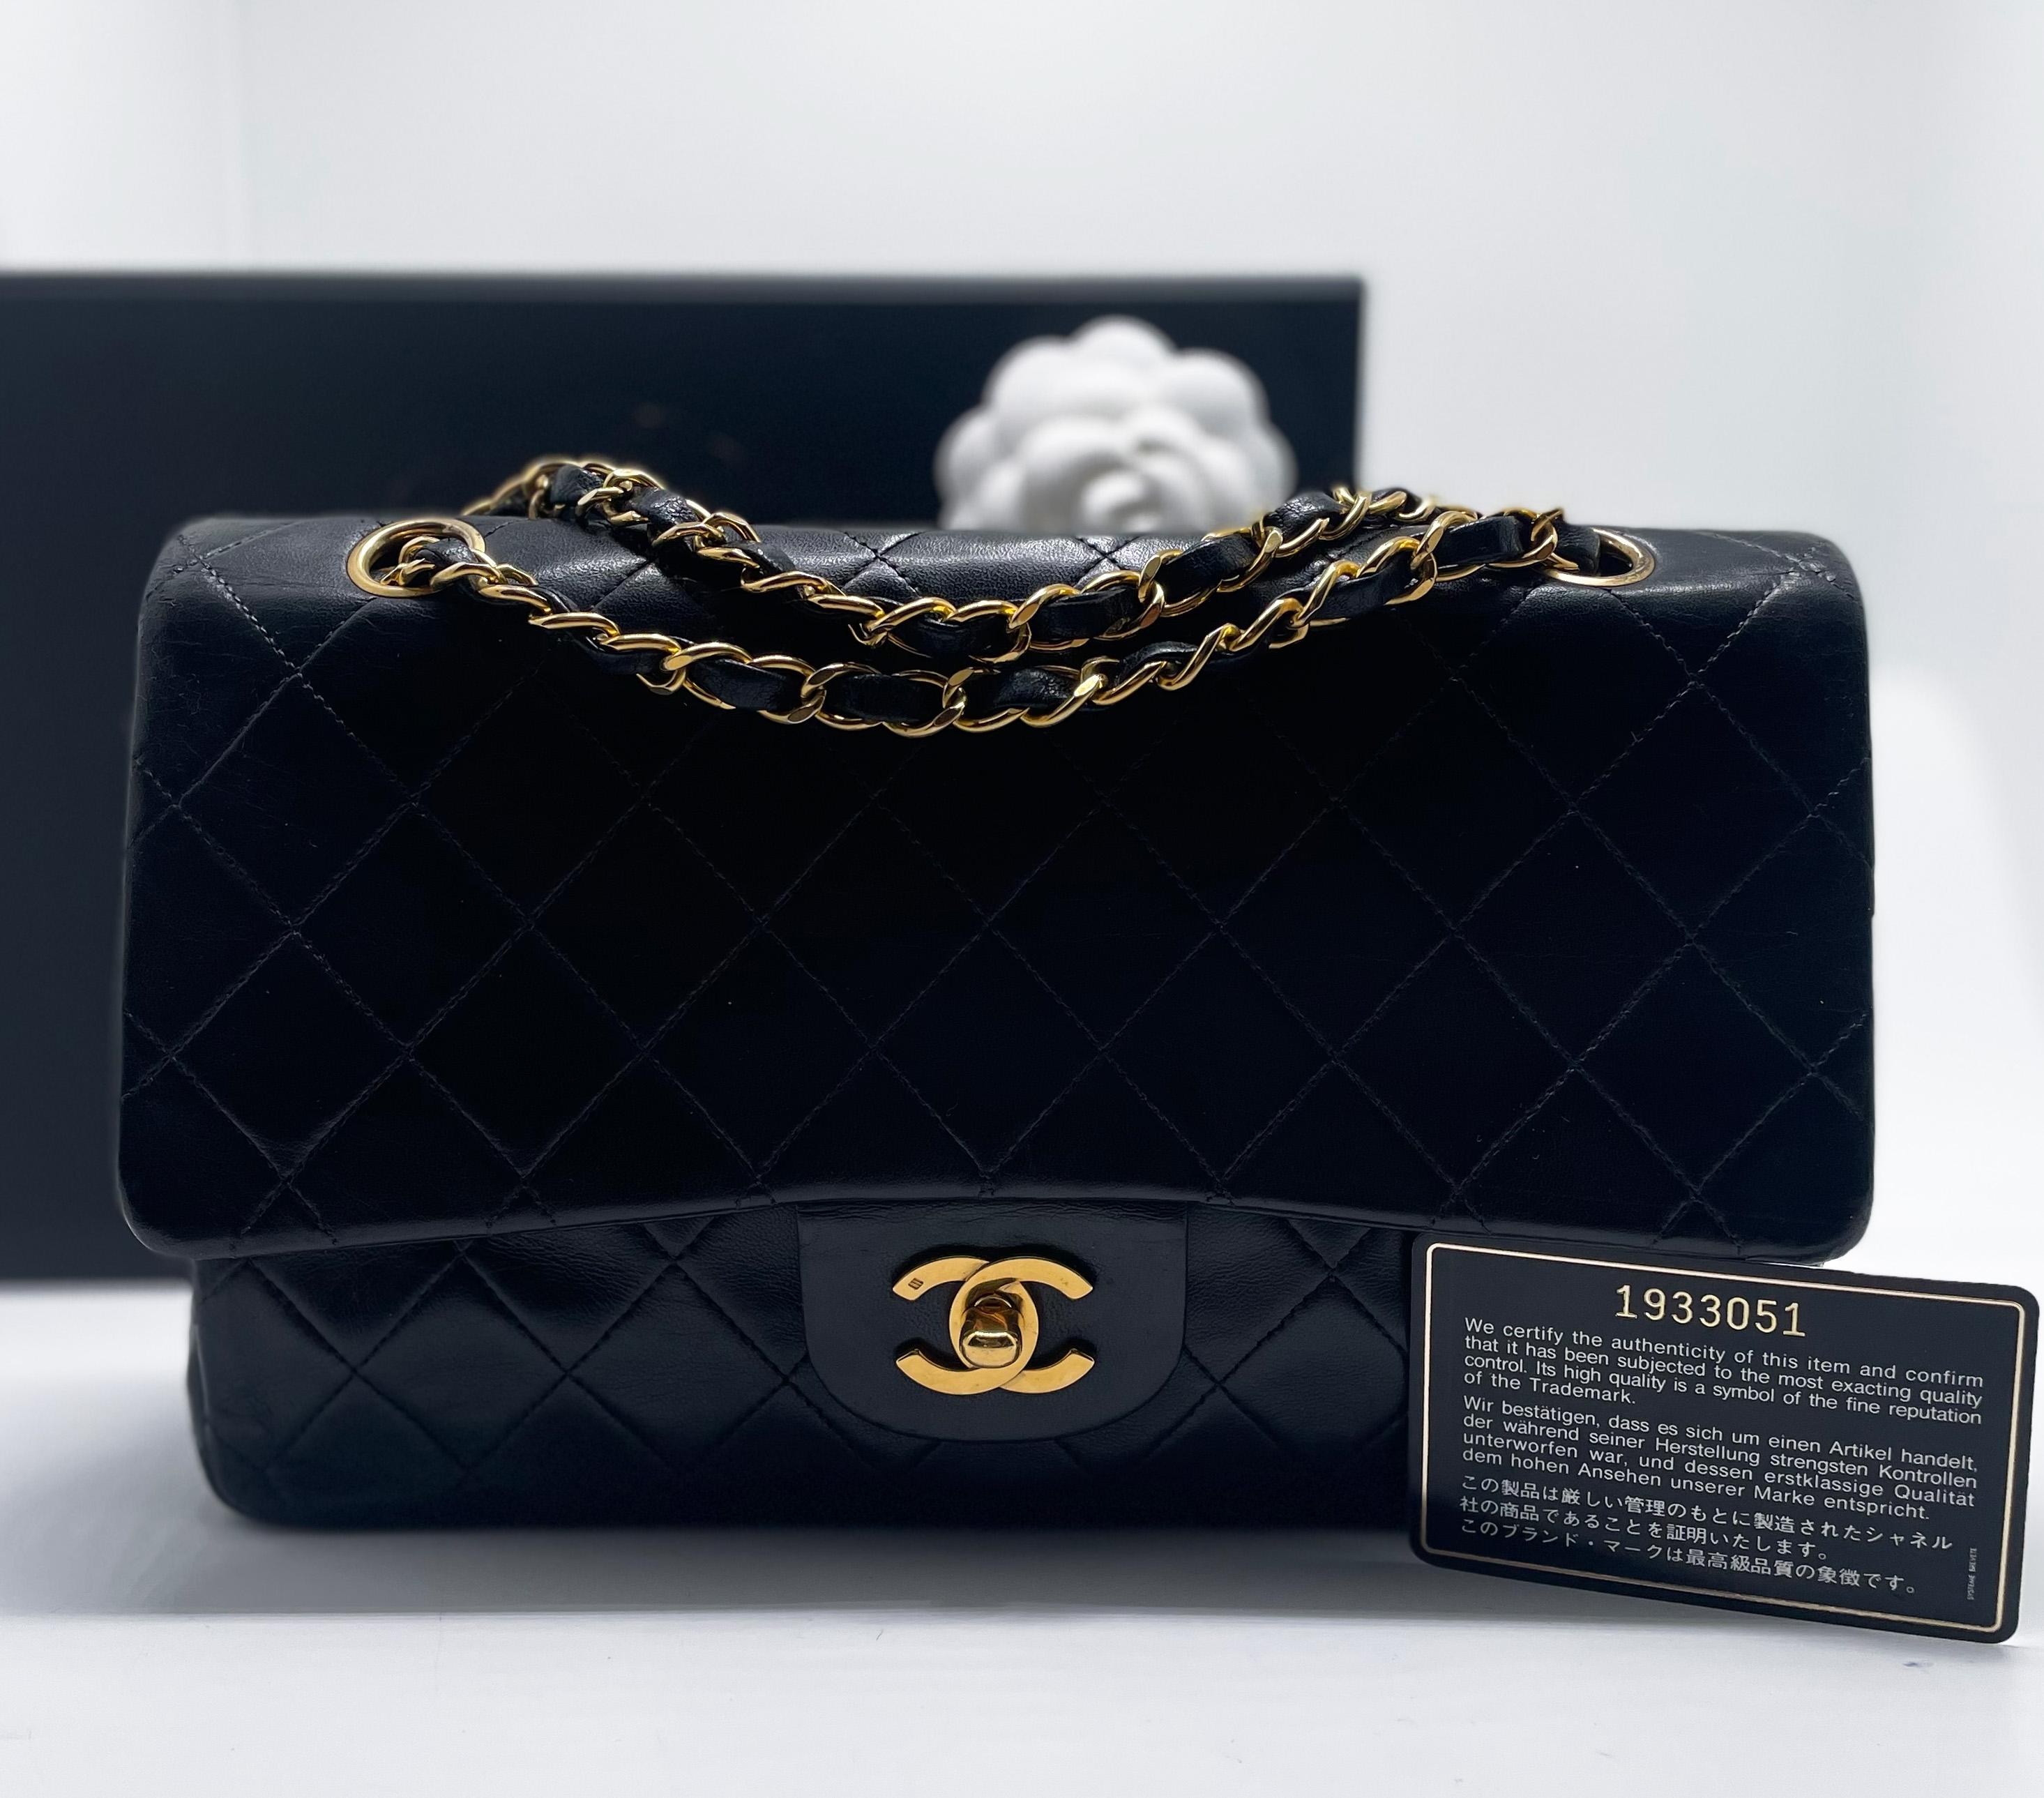 Chanel Classique handbag in black lambskin and 24-carat plated gold metal For Sale 1